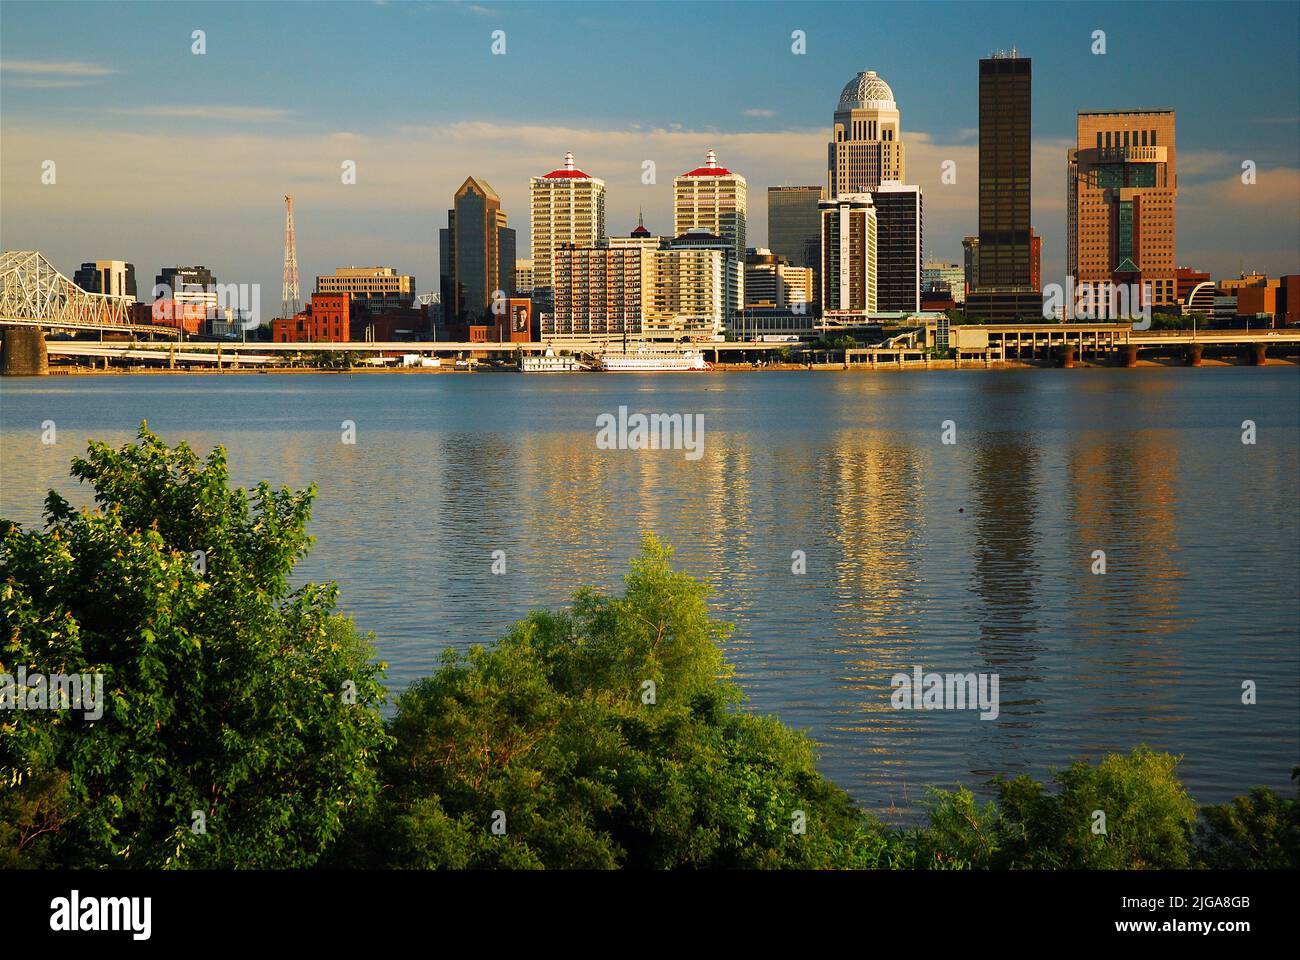 Louisville Skyline Images – Browse 108 Stock Photos, Vectors, and Video